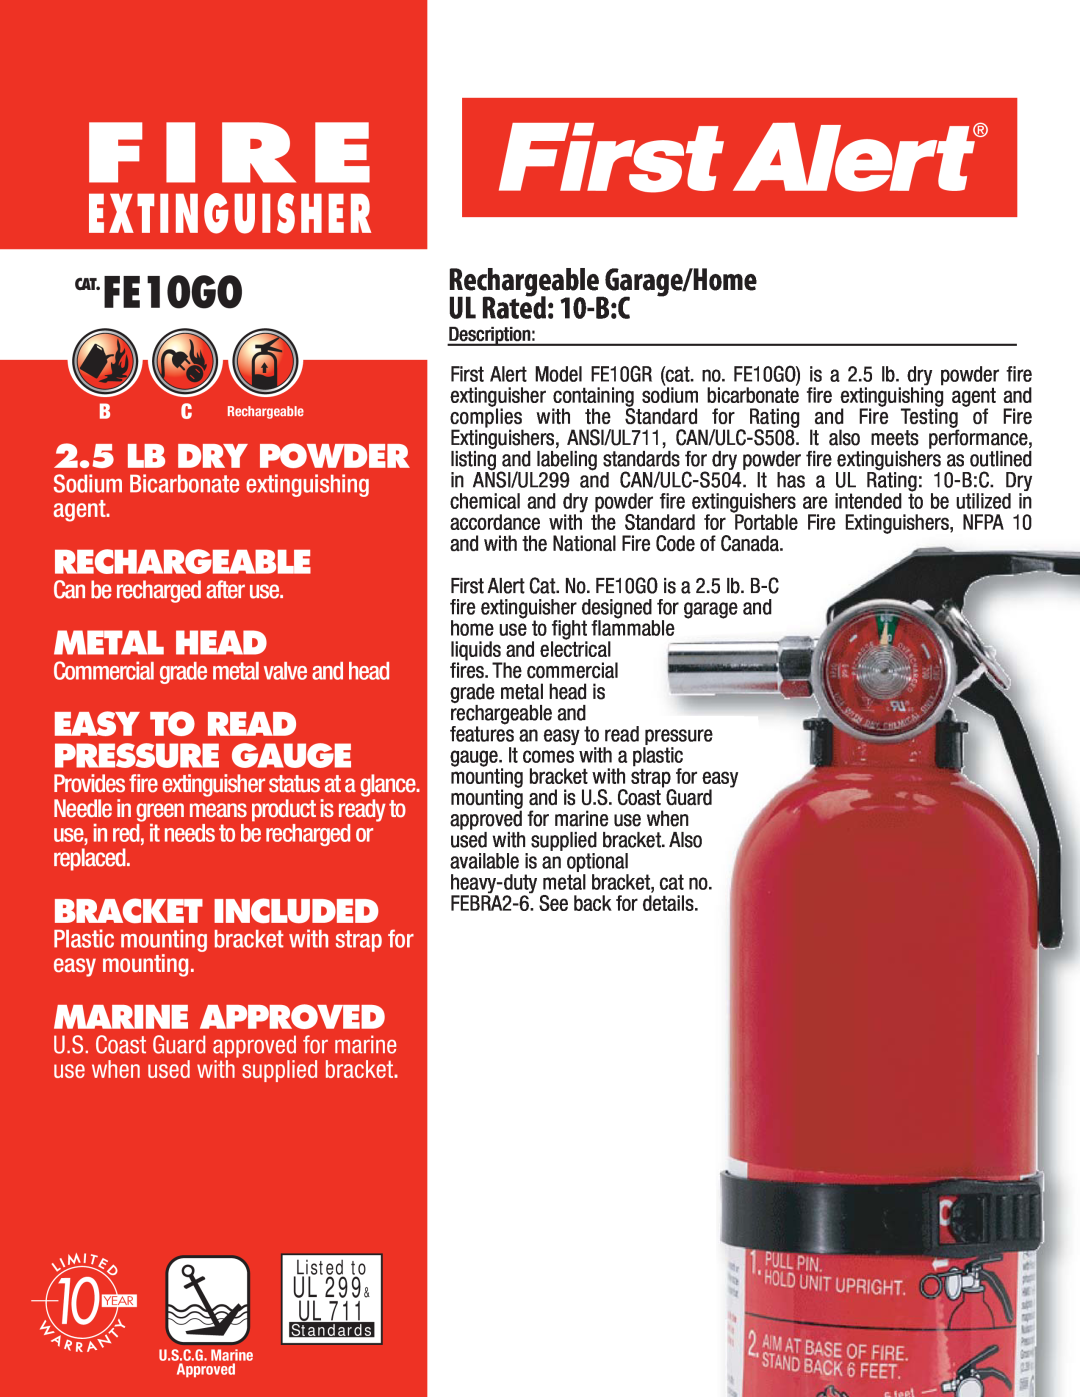 First Alert manual Commercial grade metal valve and head, Fire, Extinguisher, CAT.FE10GO, Lb Dry Powder, Rechargeable 